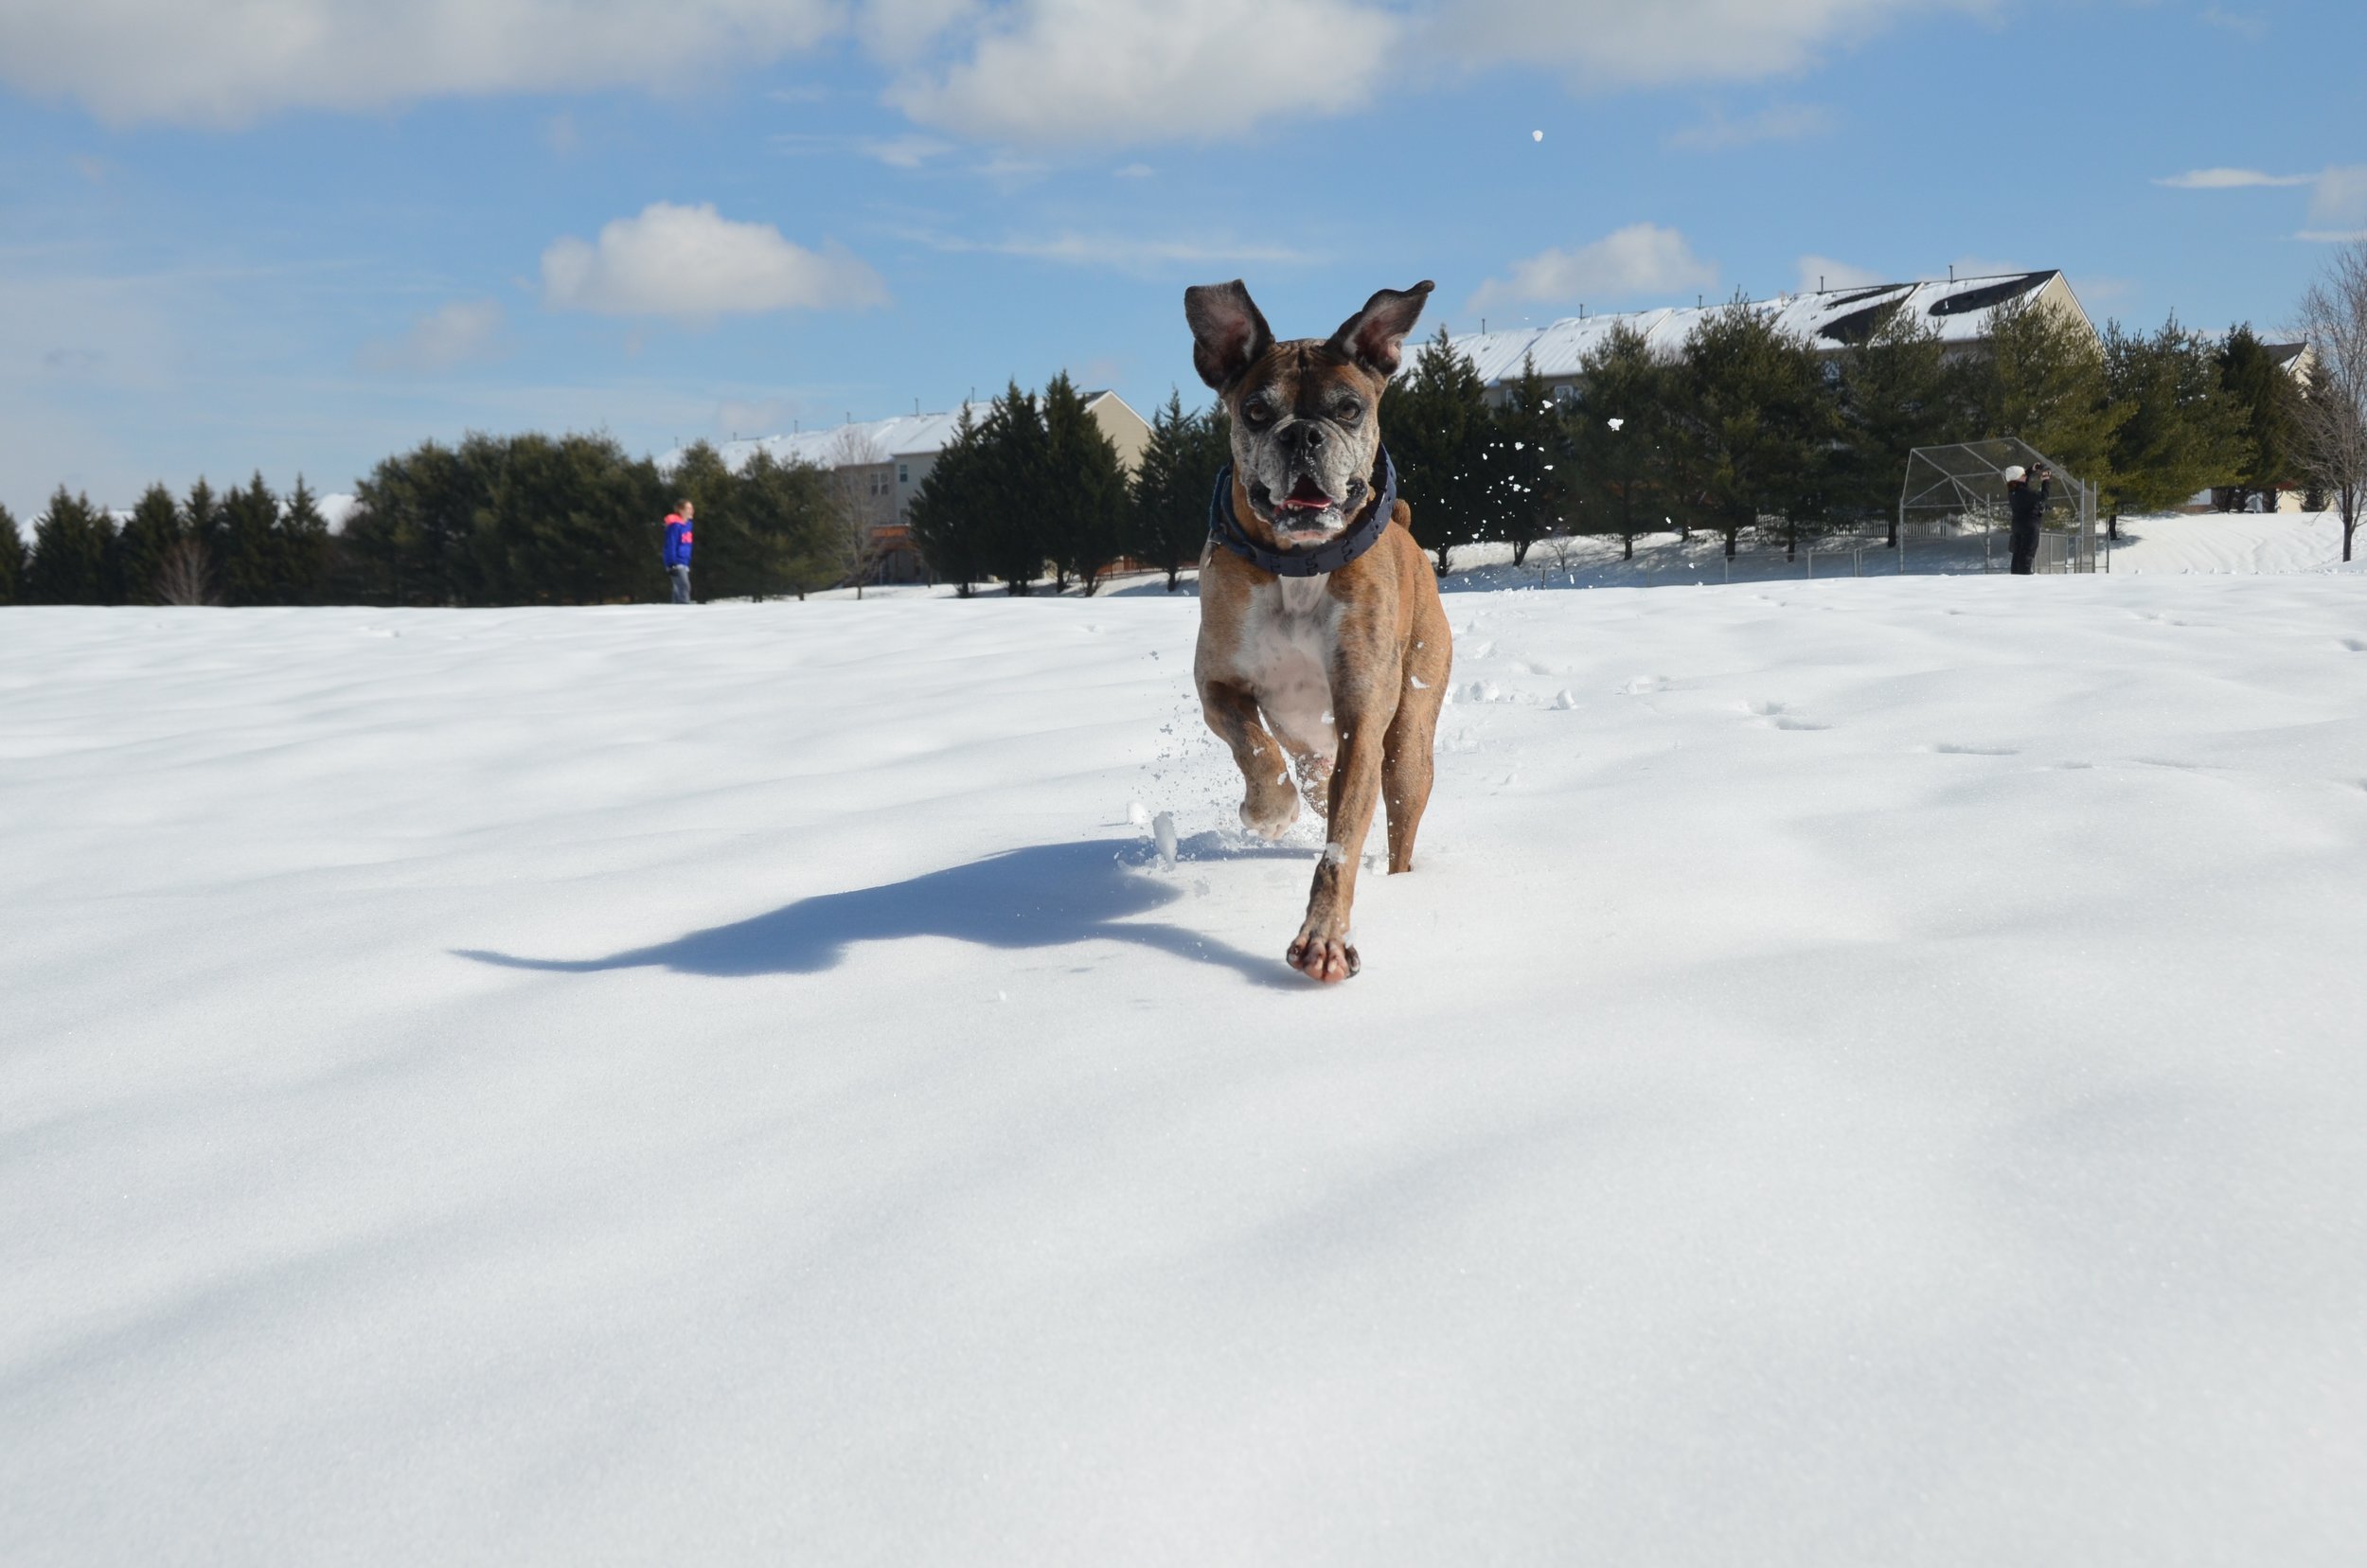 Copy of Stewie Jumping in the Snow.jpg